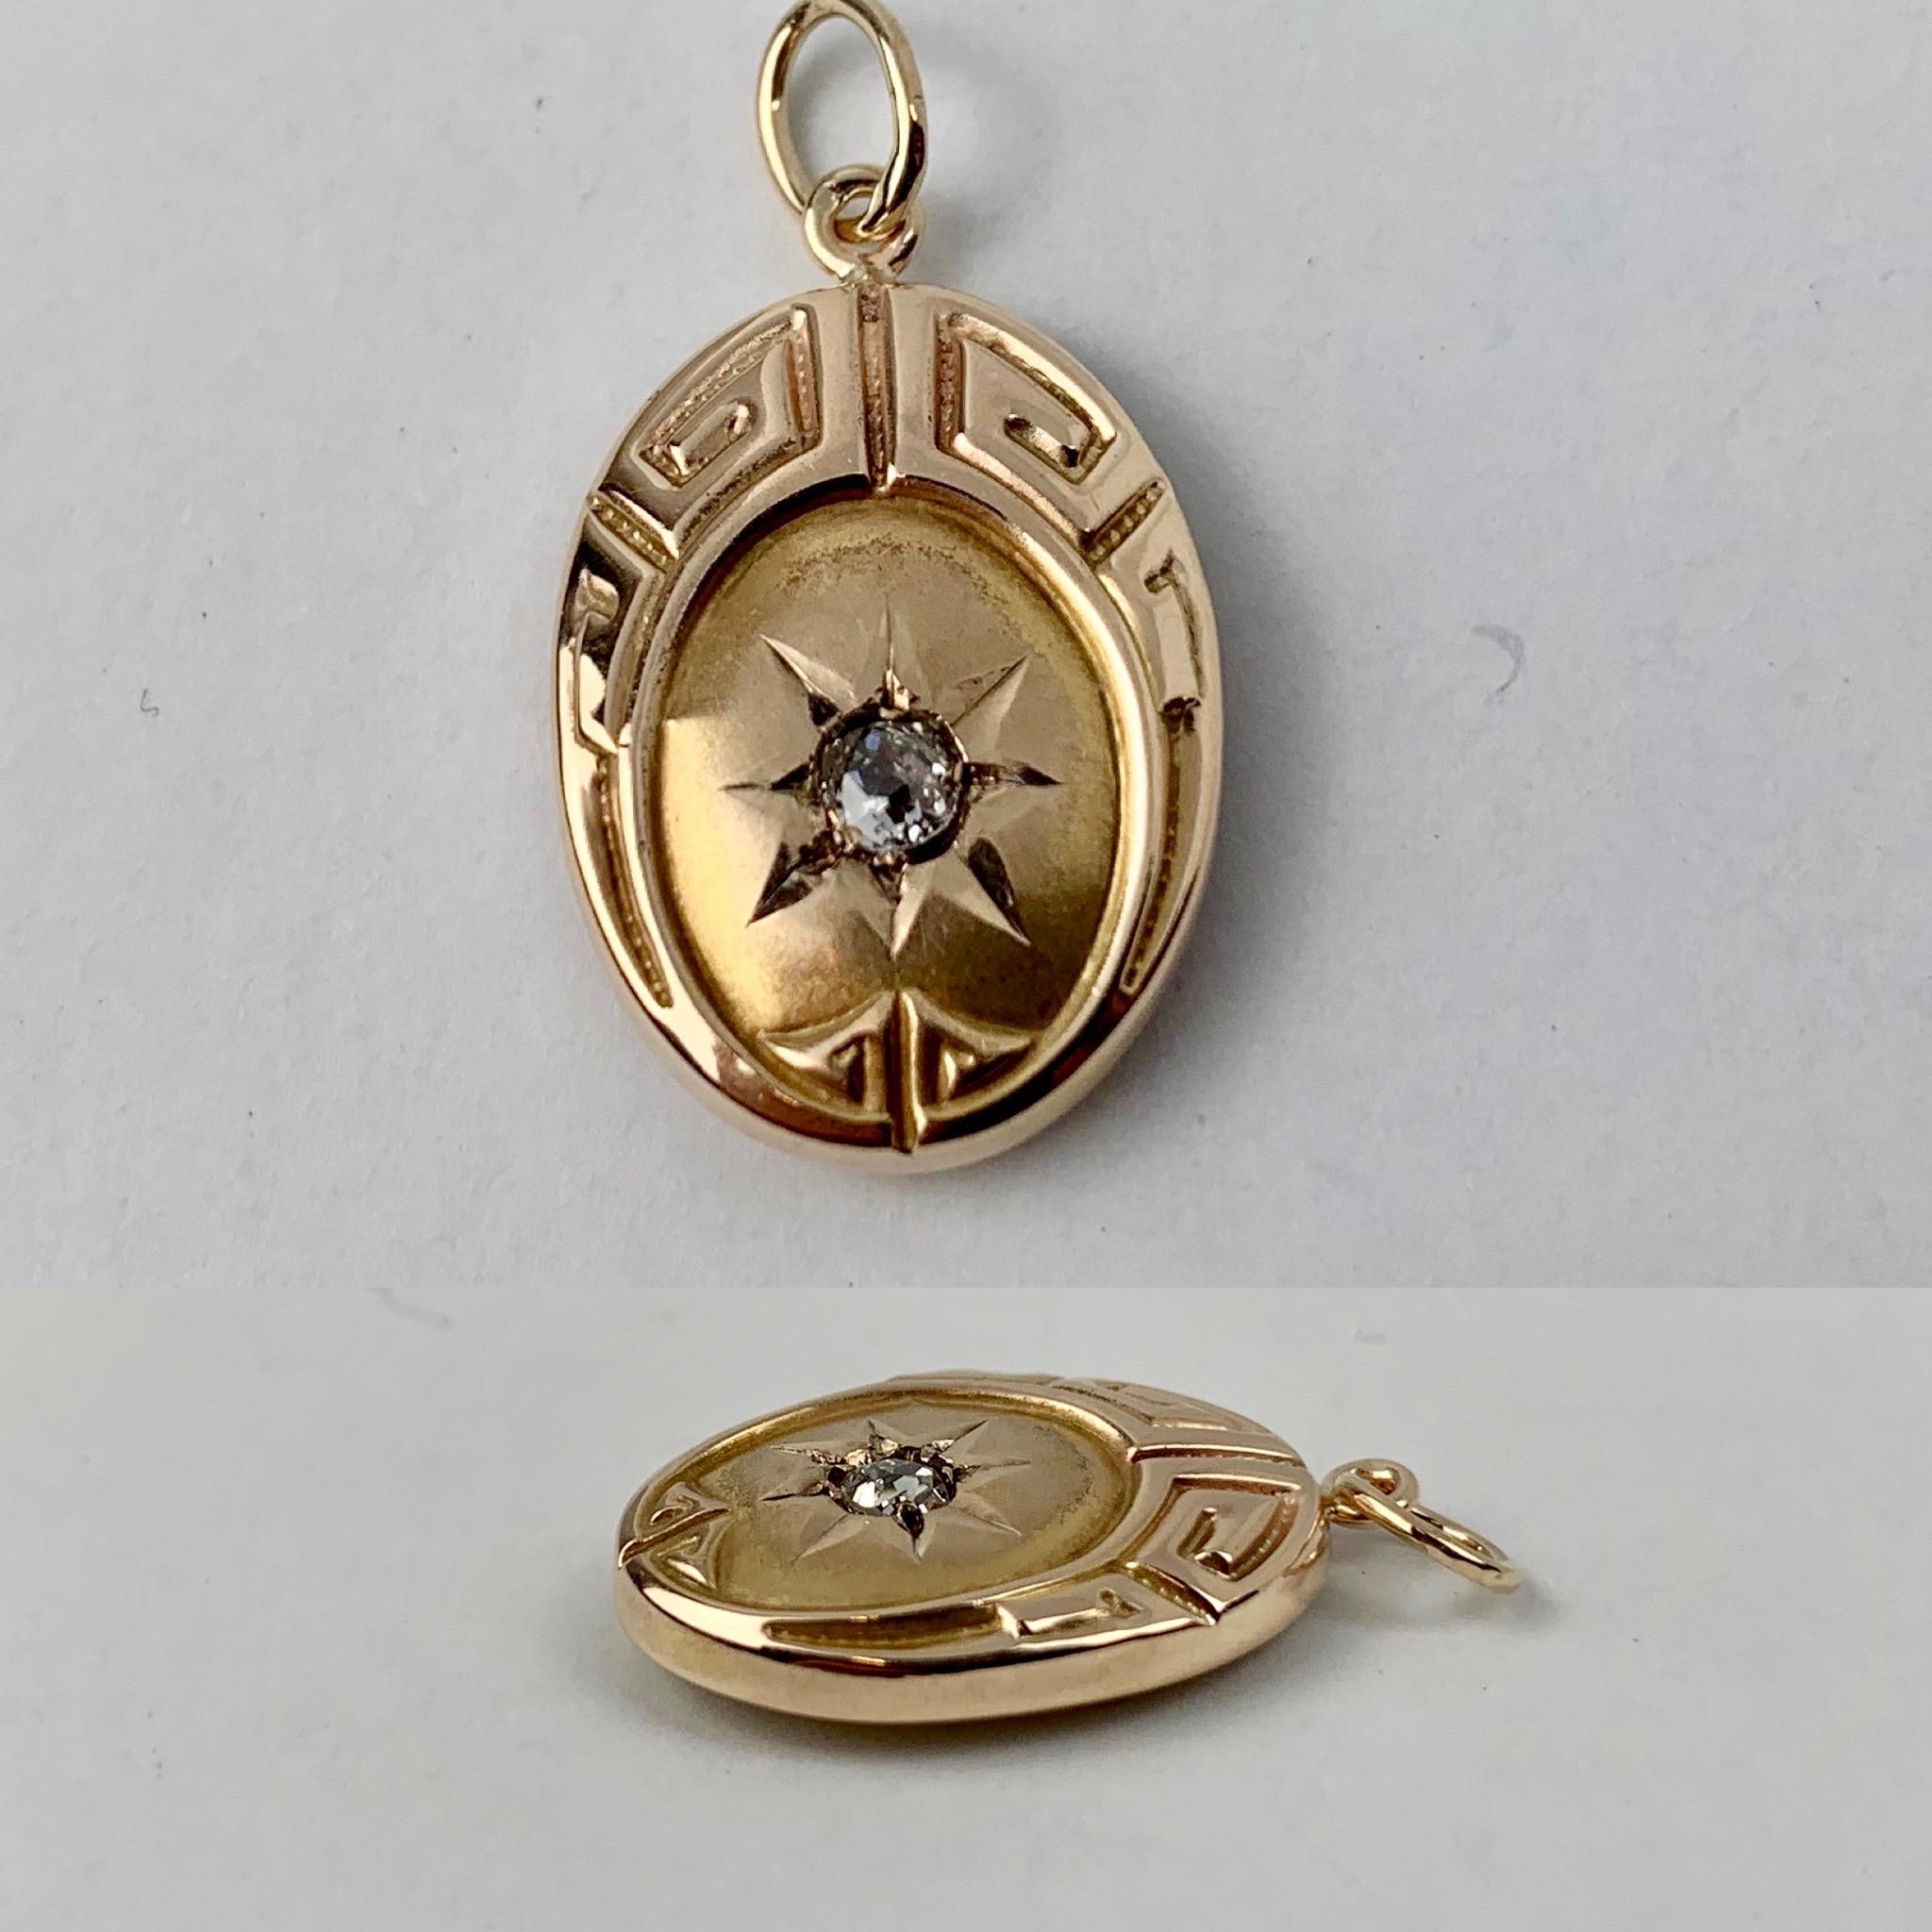 Perfect little oval 10k yellow gold pendant with a Greek key motif and a diamond centered in a sunburst.
Professionally cleaned and polished.
1.2 grams